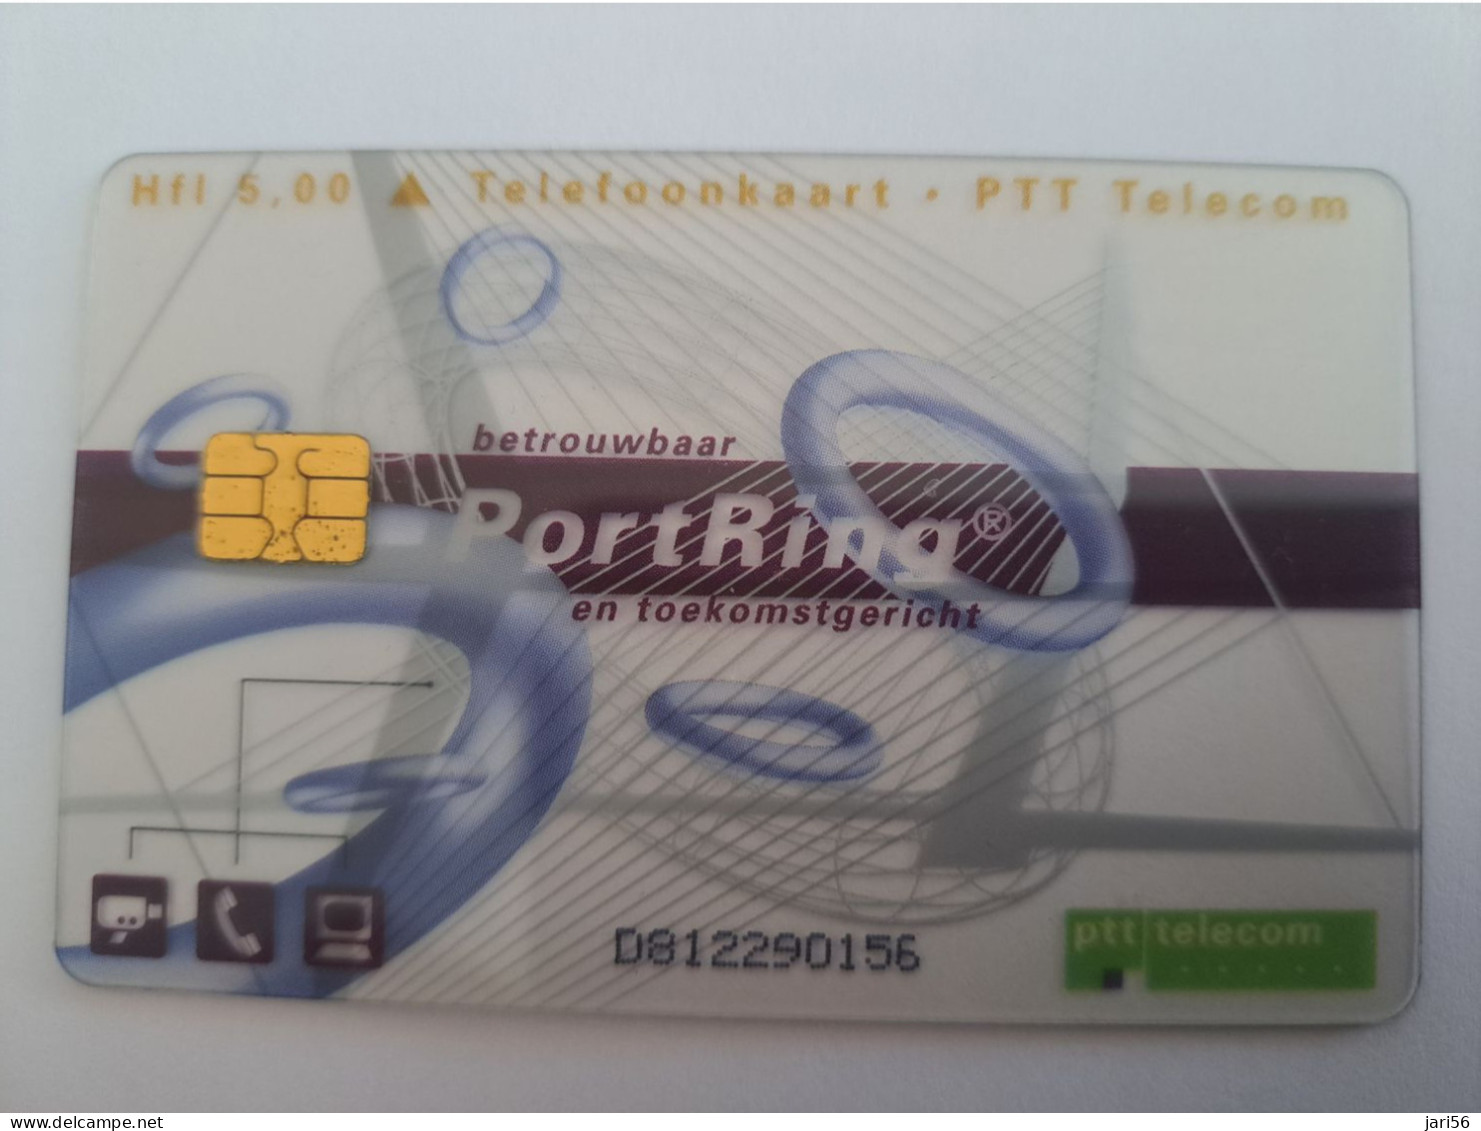 NETHERLANDS  CHIPCARD HFL 5,00 PORTRING TRANSPARANT CARD   NO;CKD 101 MINT CARD    ** 14369** - Sin Clasificación